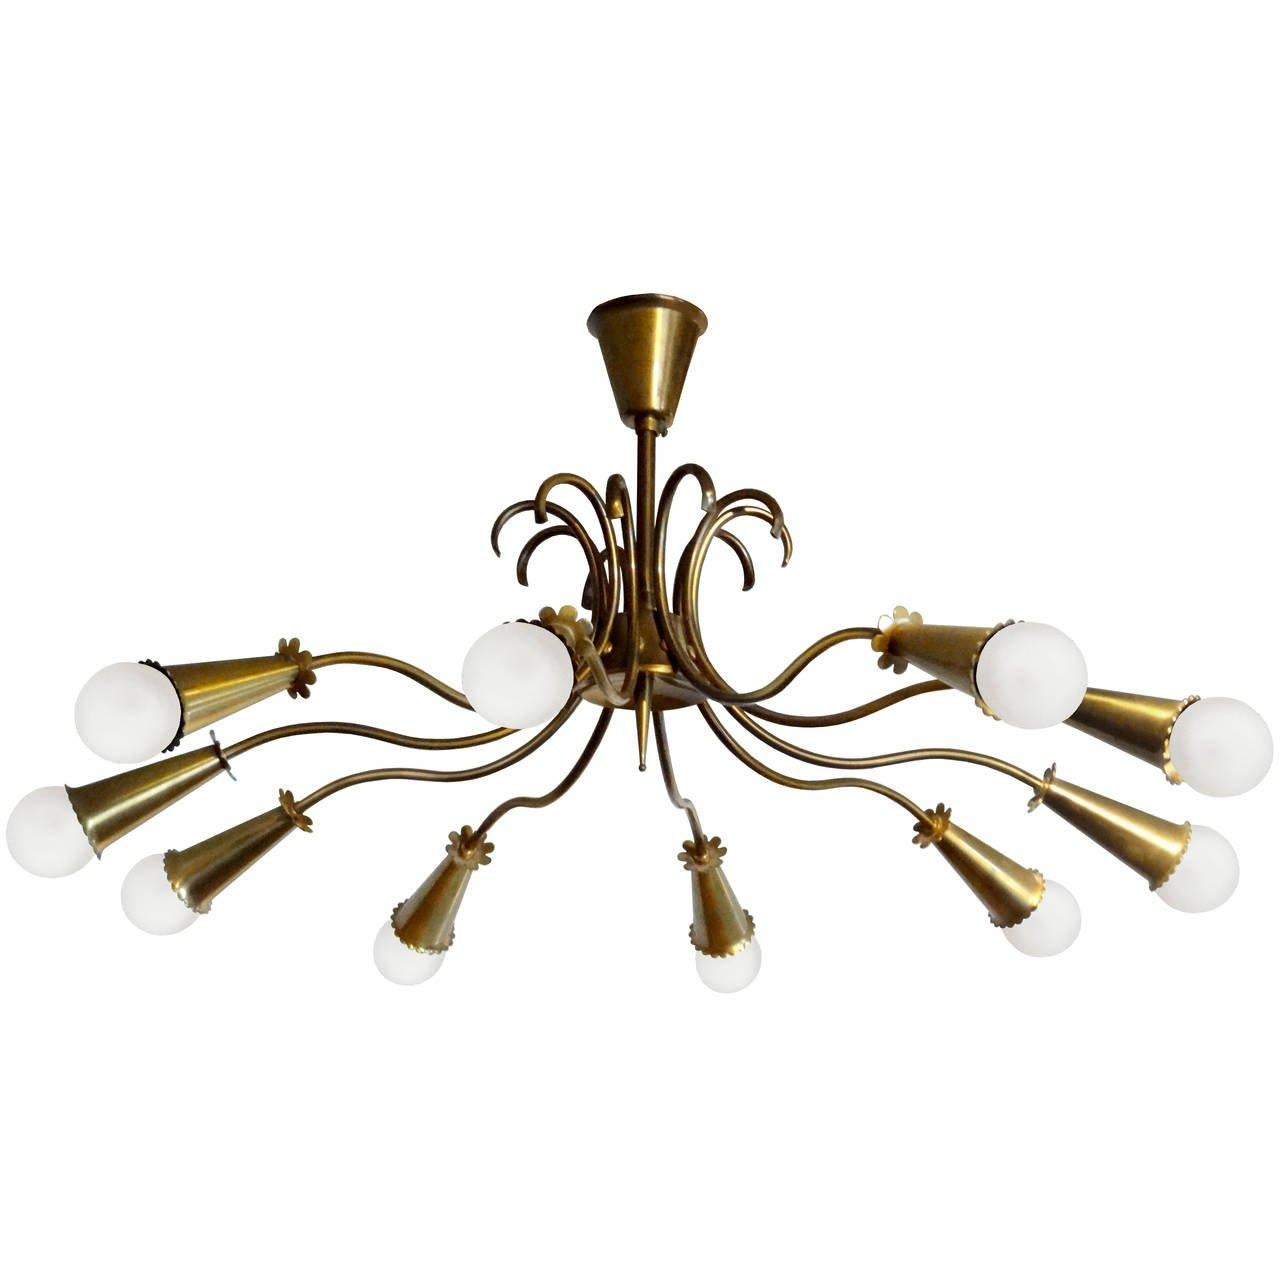 Oscar Torlasco Large Brass Ceiling Fixture Chandelier In Excellent Condition For Sale In New York, NY